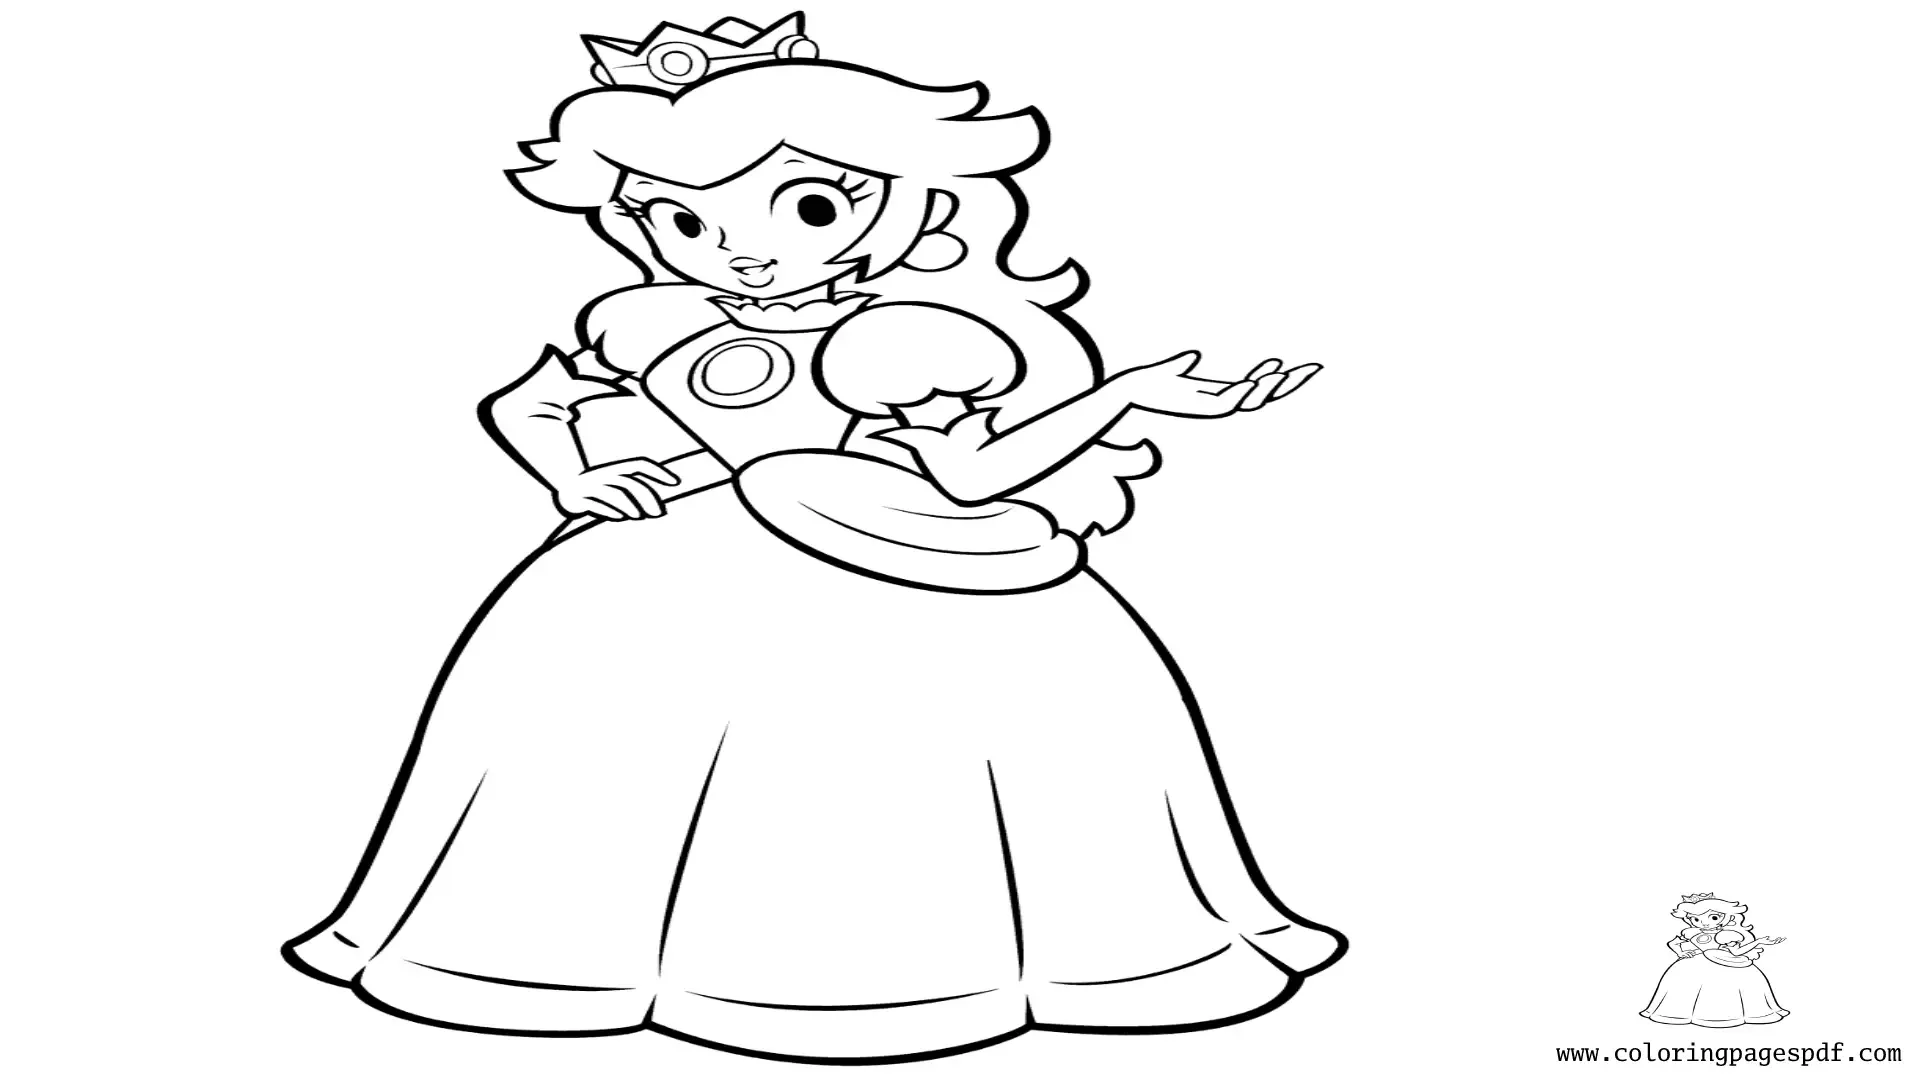 Coloring Page Of Princess Peach Smiling